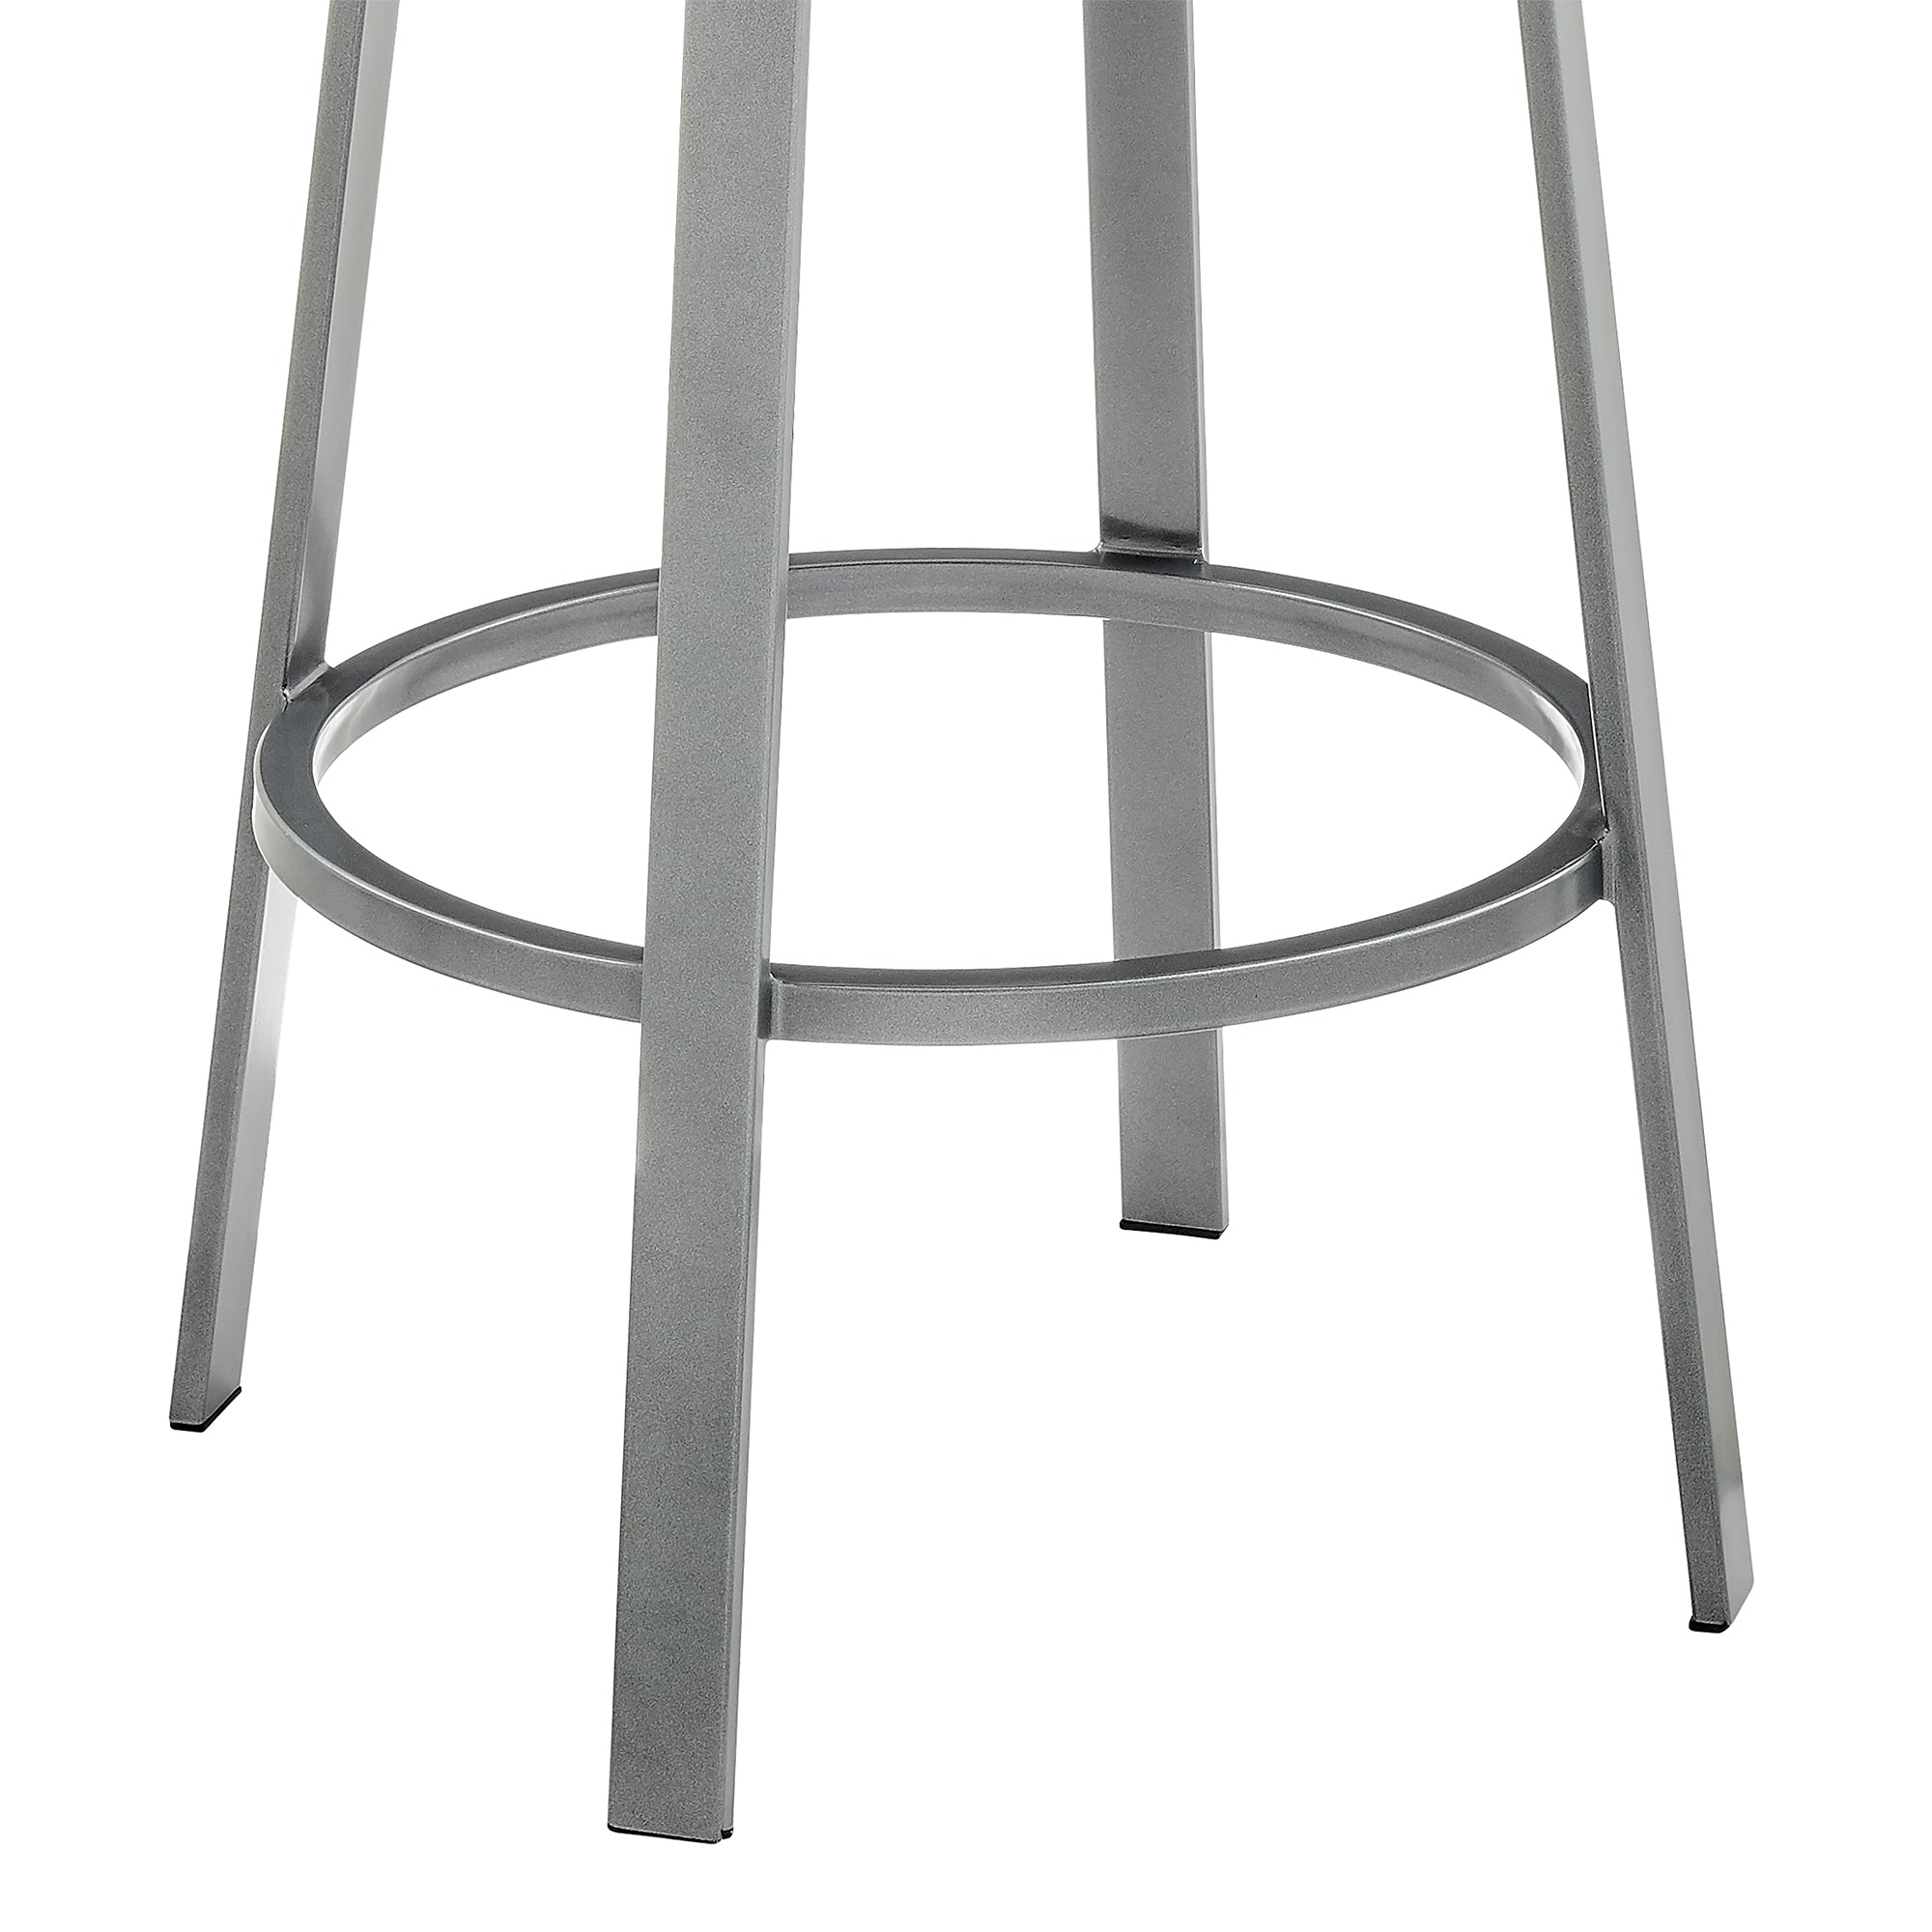 Armen Living - Neura Swivel Counter or Bar Stool in Metal with Faux Leather  - 840254333529